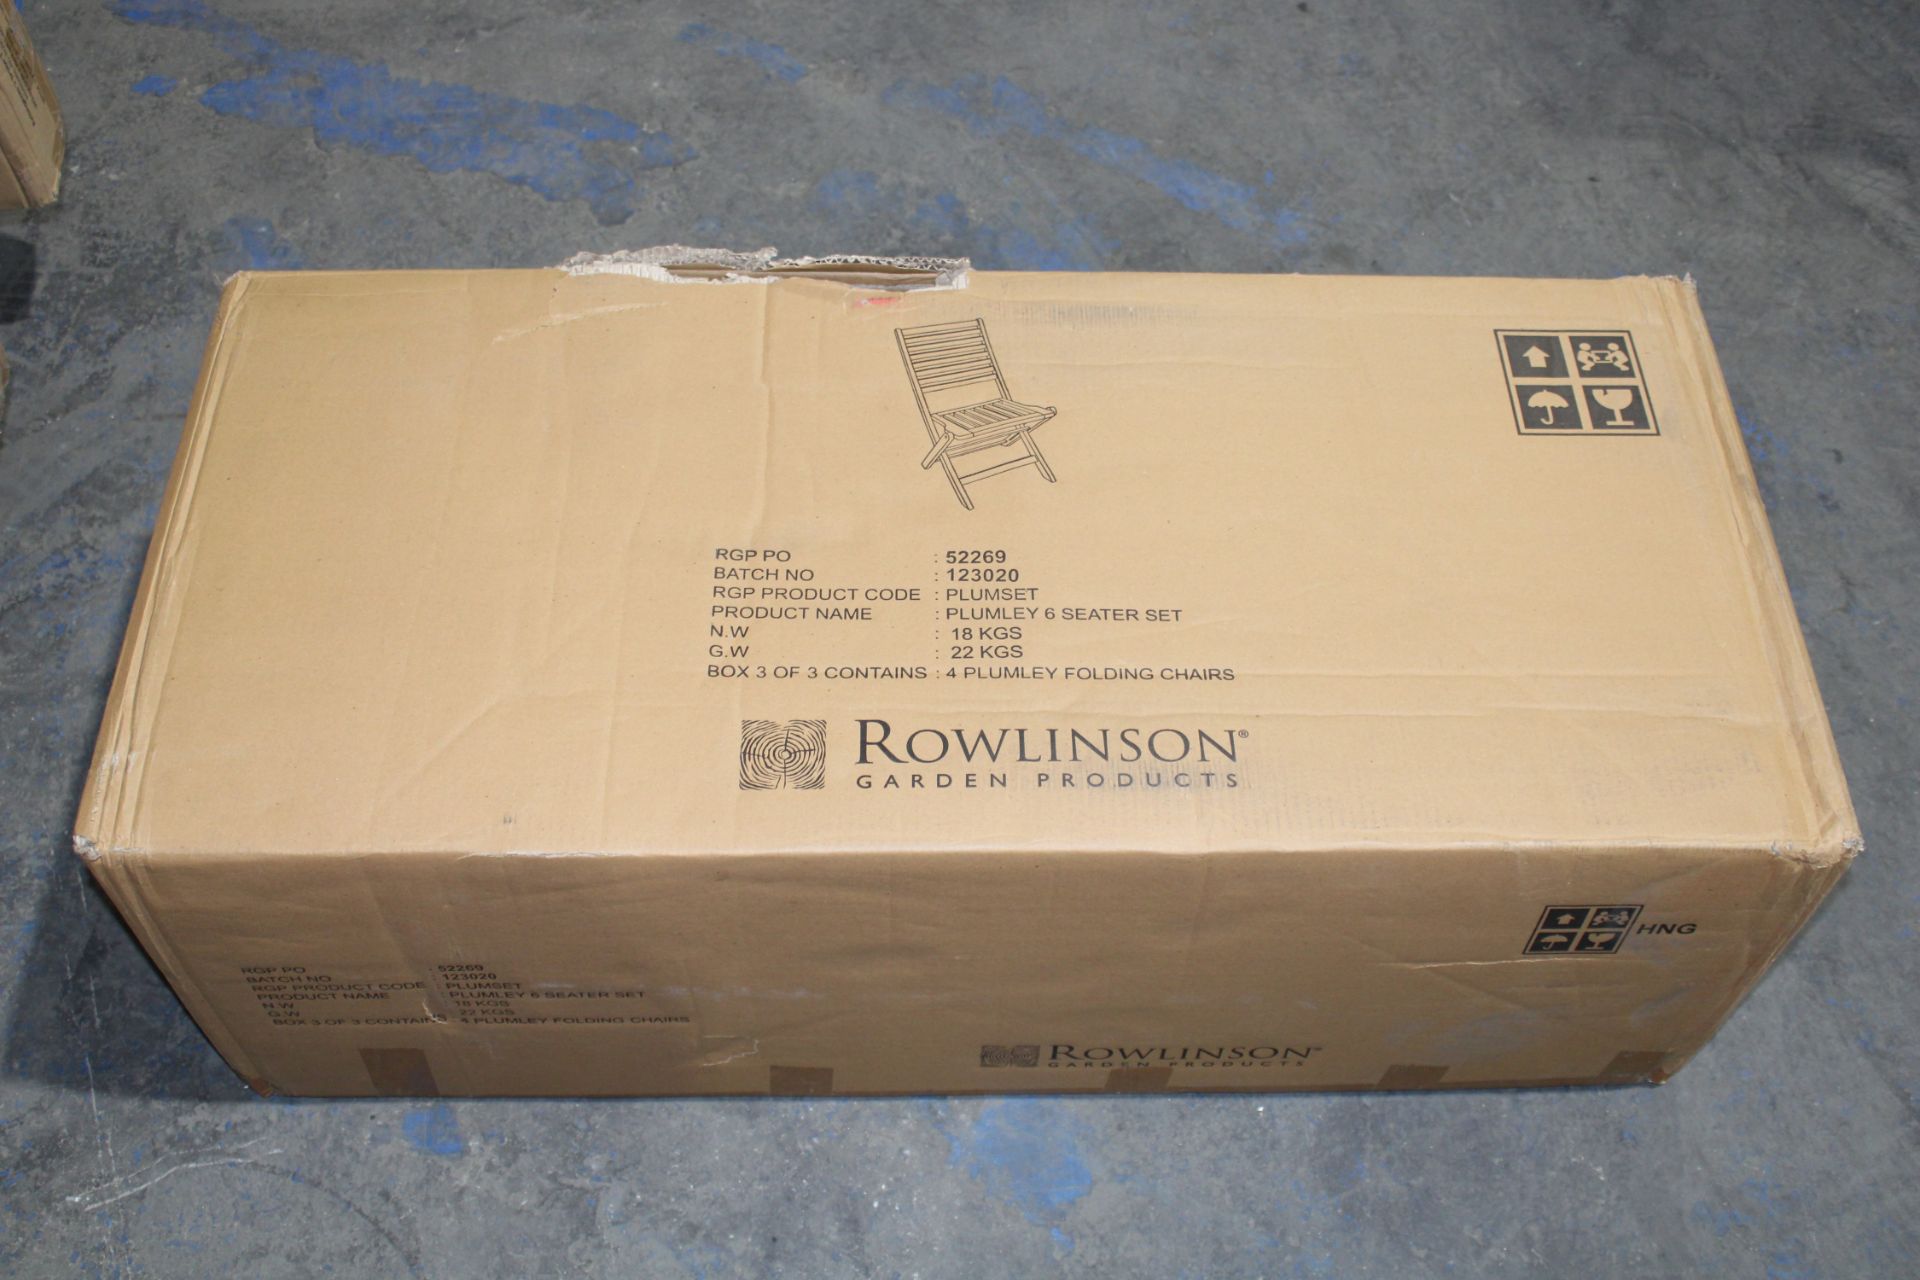 BOXED ROWLINSON GARDEN PRODUCTS 4 PLUMLEY FOLDING CHAIRS WITH CUSHIONS RRP £200.00 (AS SEEN IN - Image 2 of 2